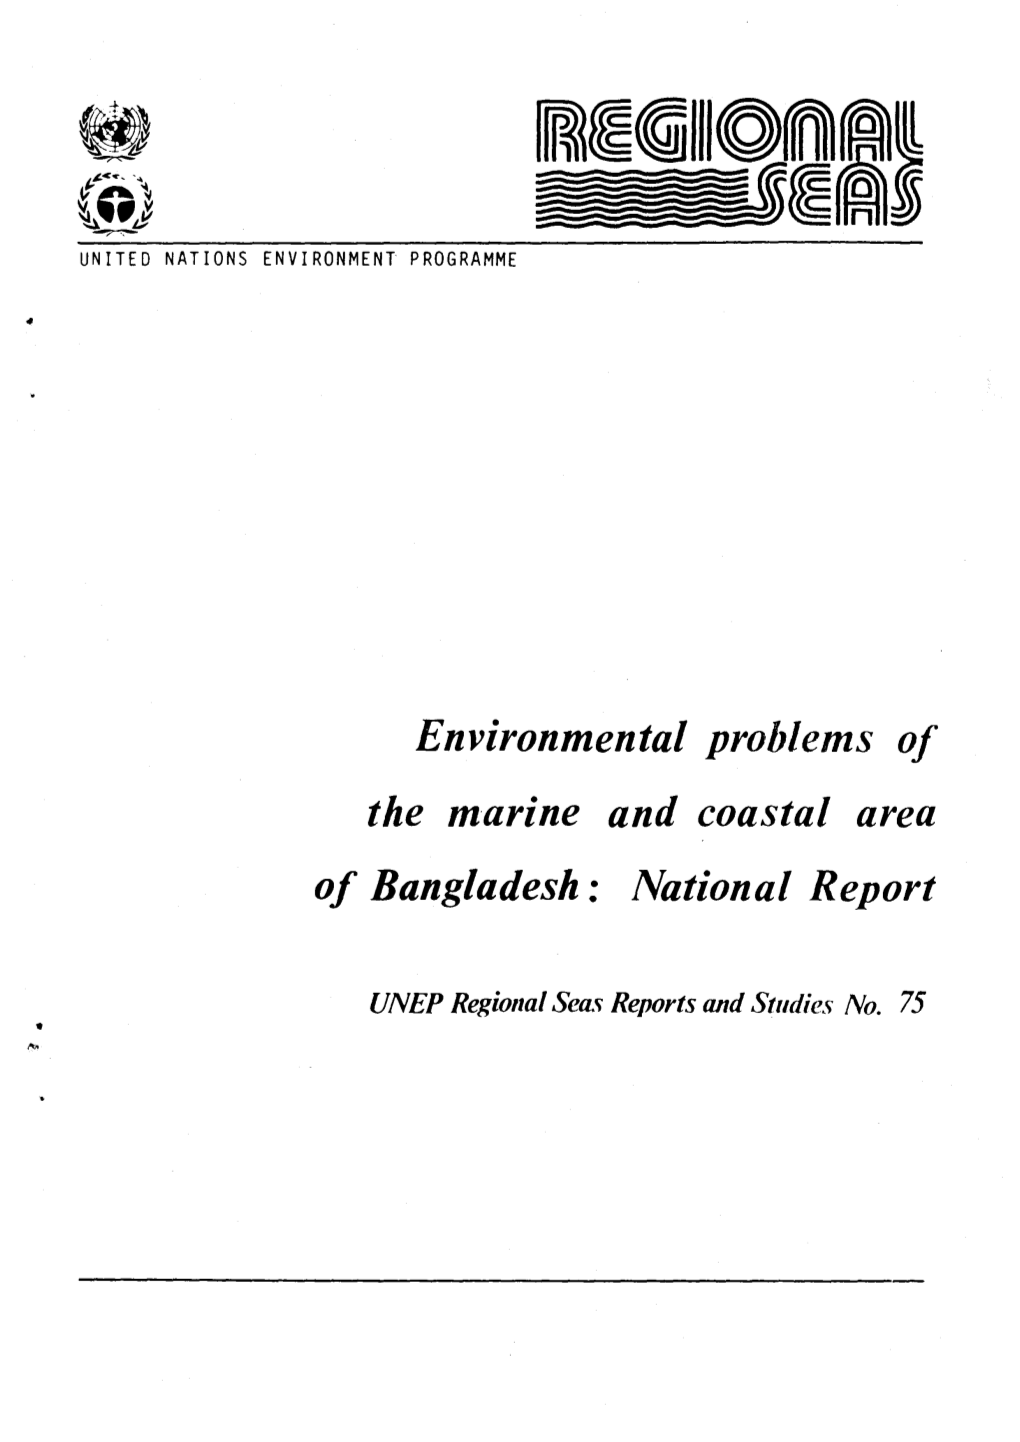 Environmental Problems of the Marine and Coastal Area of Bangladesh: National Report